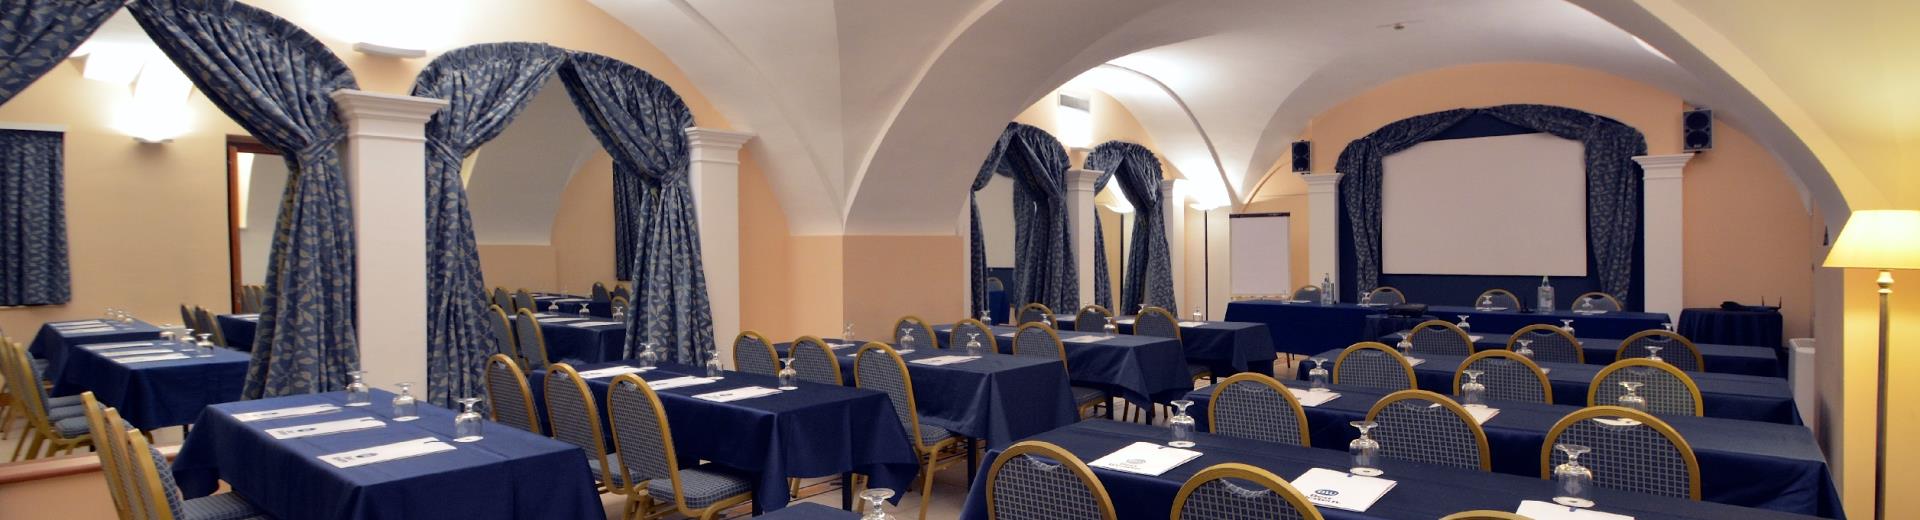 Arpino Meeting room for your business meetings